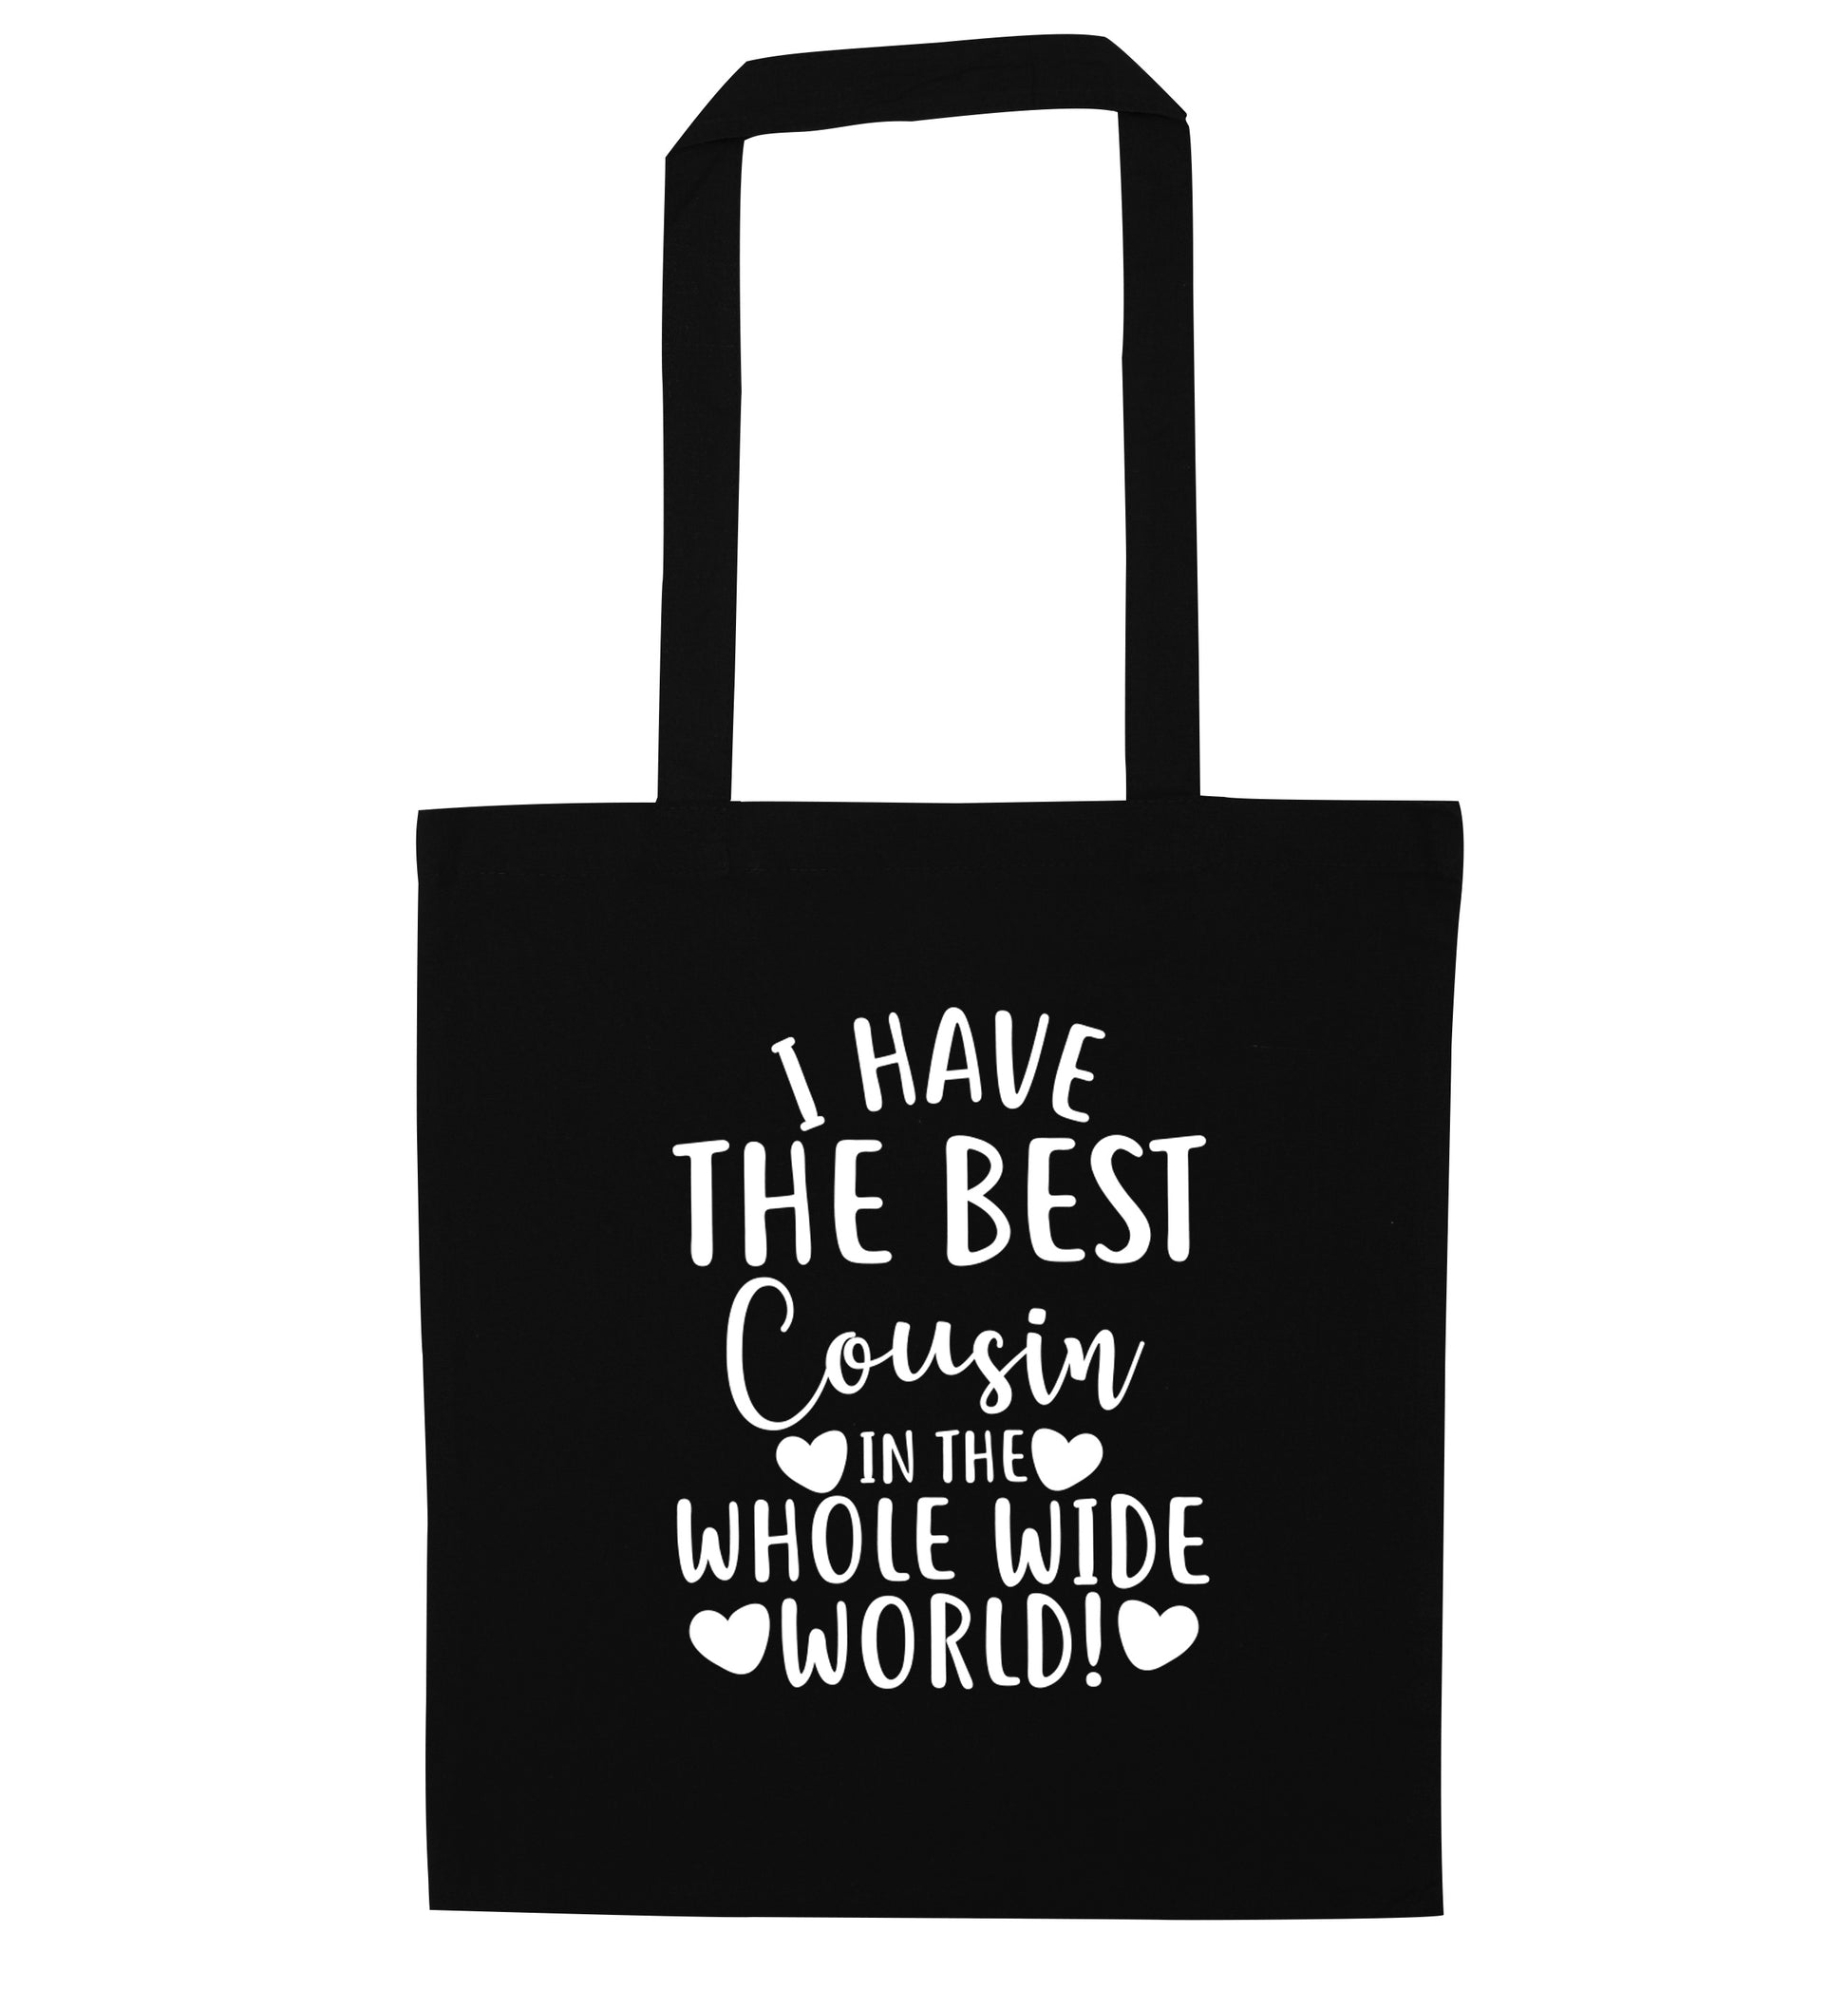 I have the best cousin in the whole wide world! black tote bag